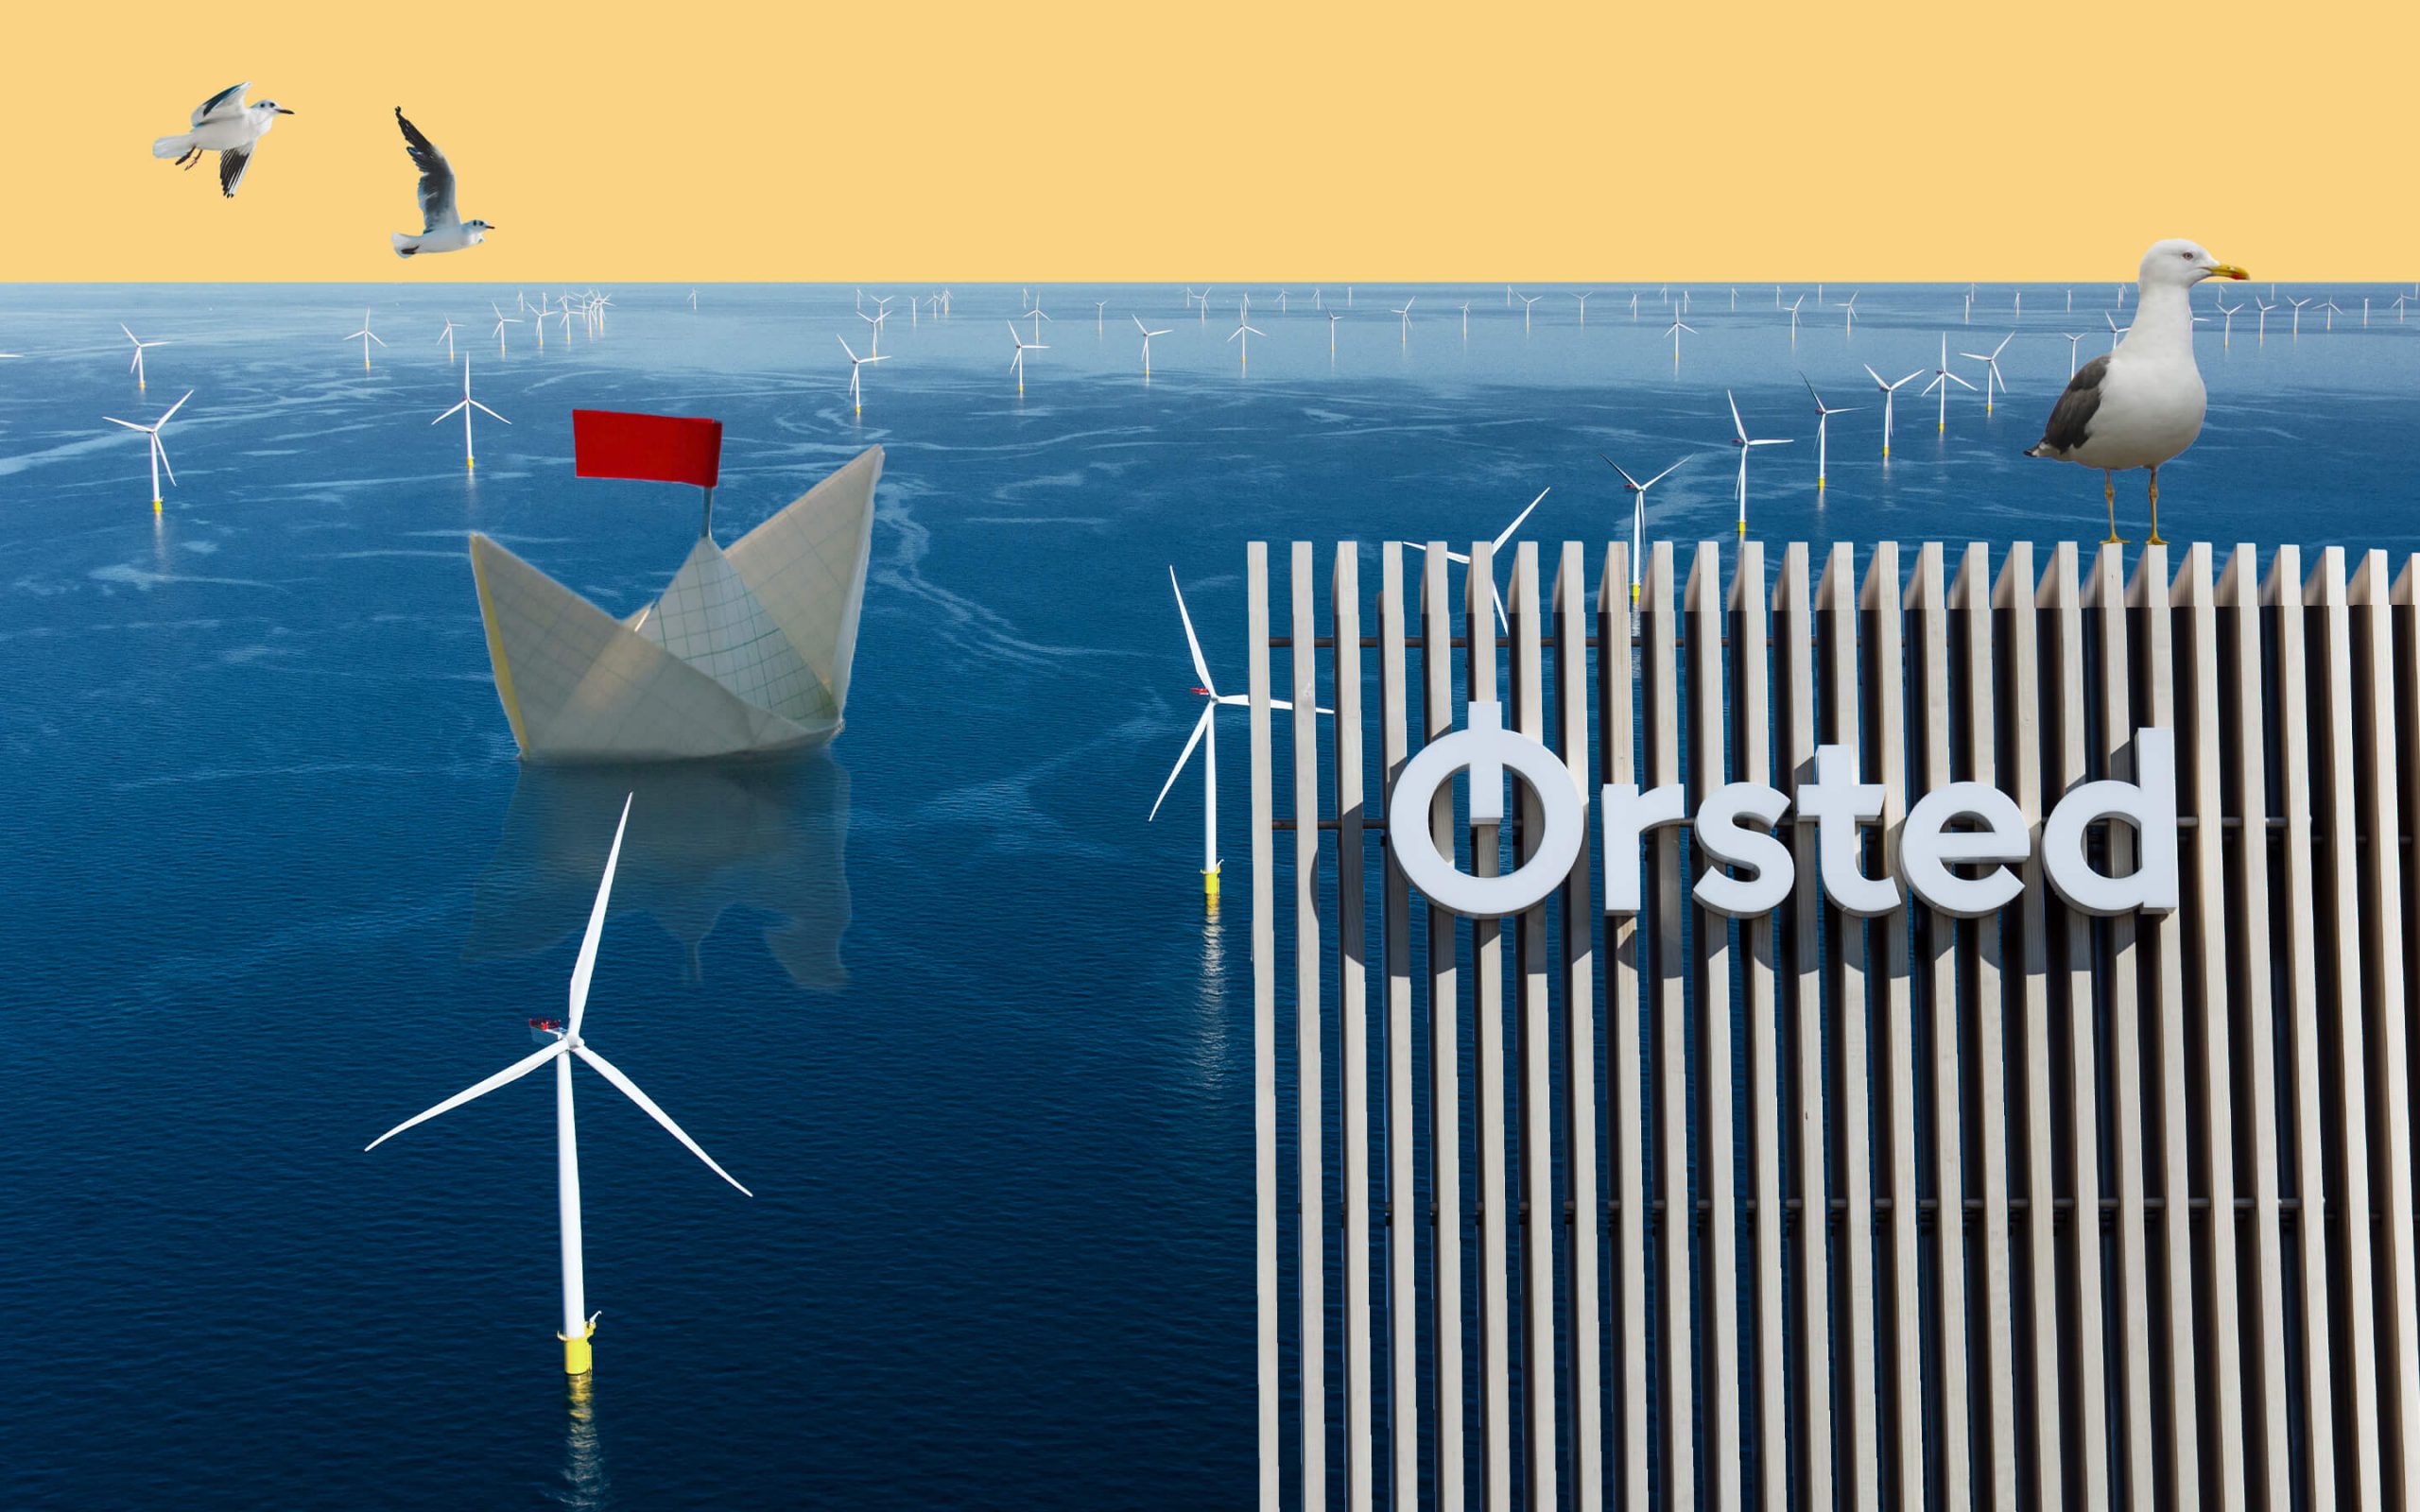 Ørsted has been named the most sustainable company in the world